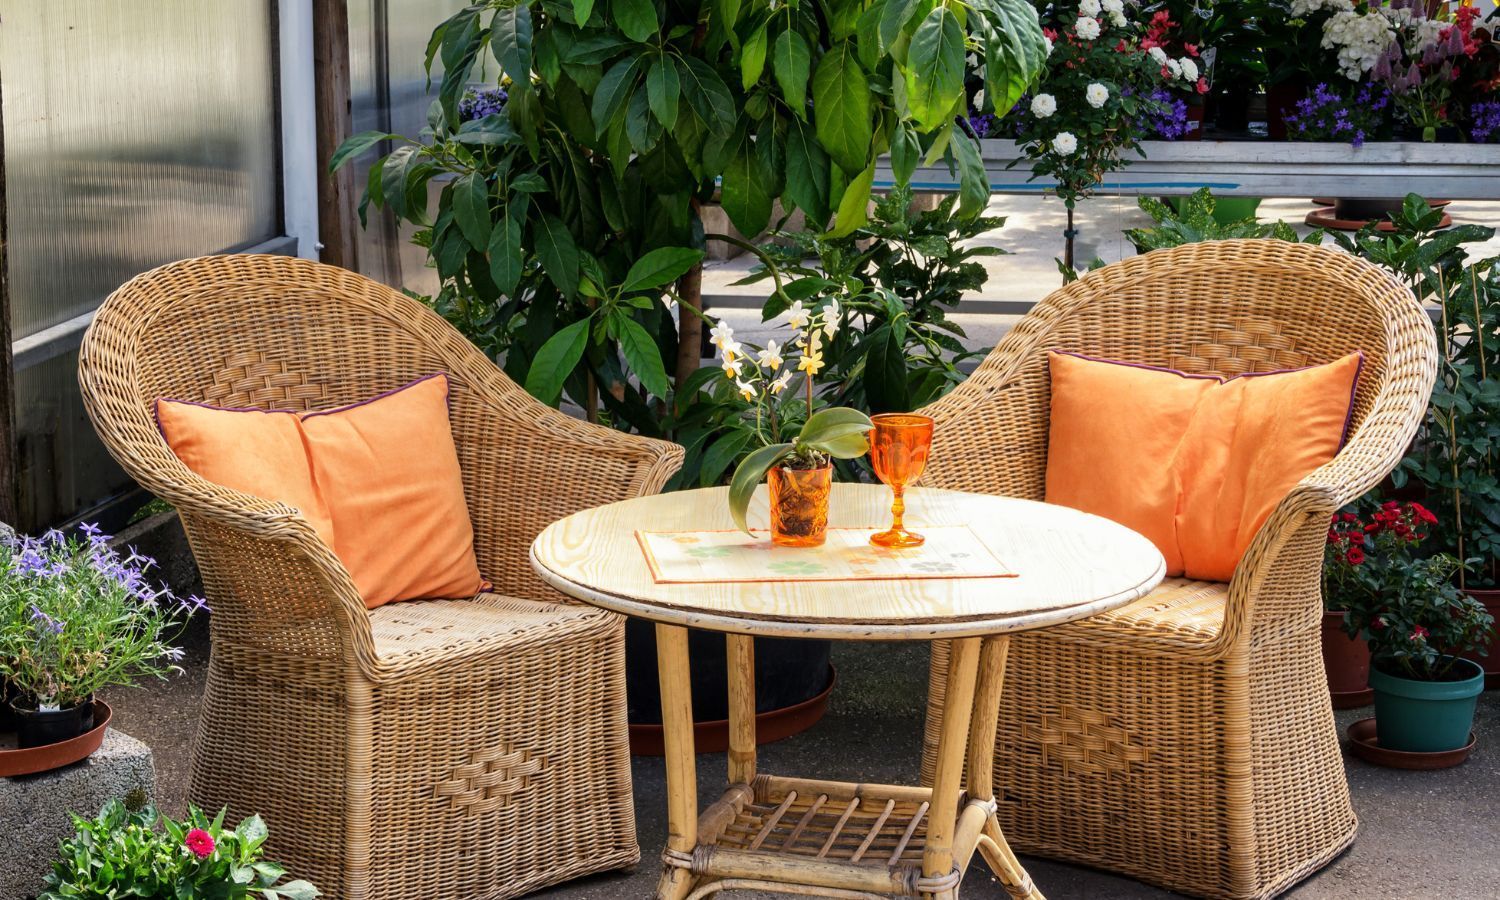 Cleaning Your Patio for spring